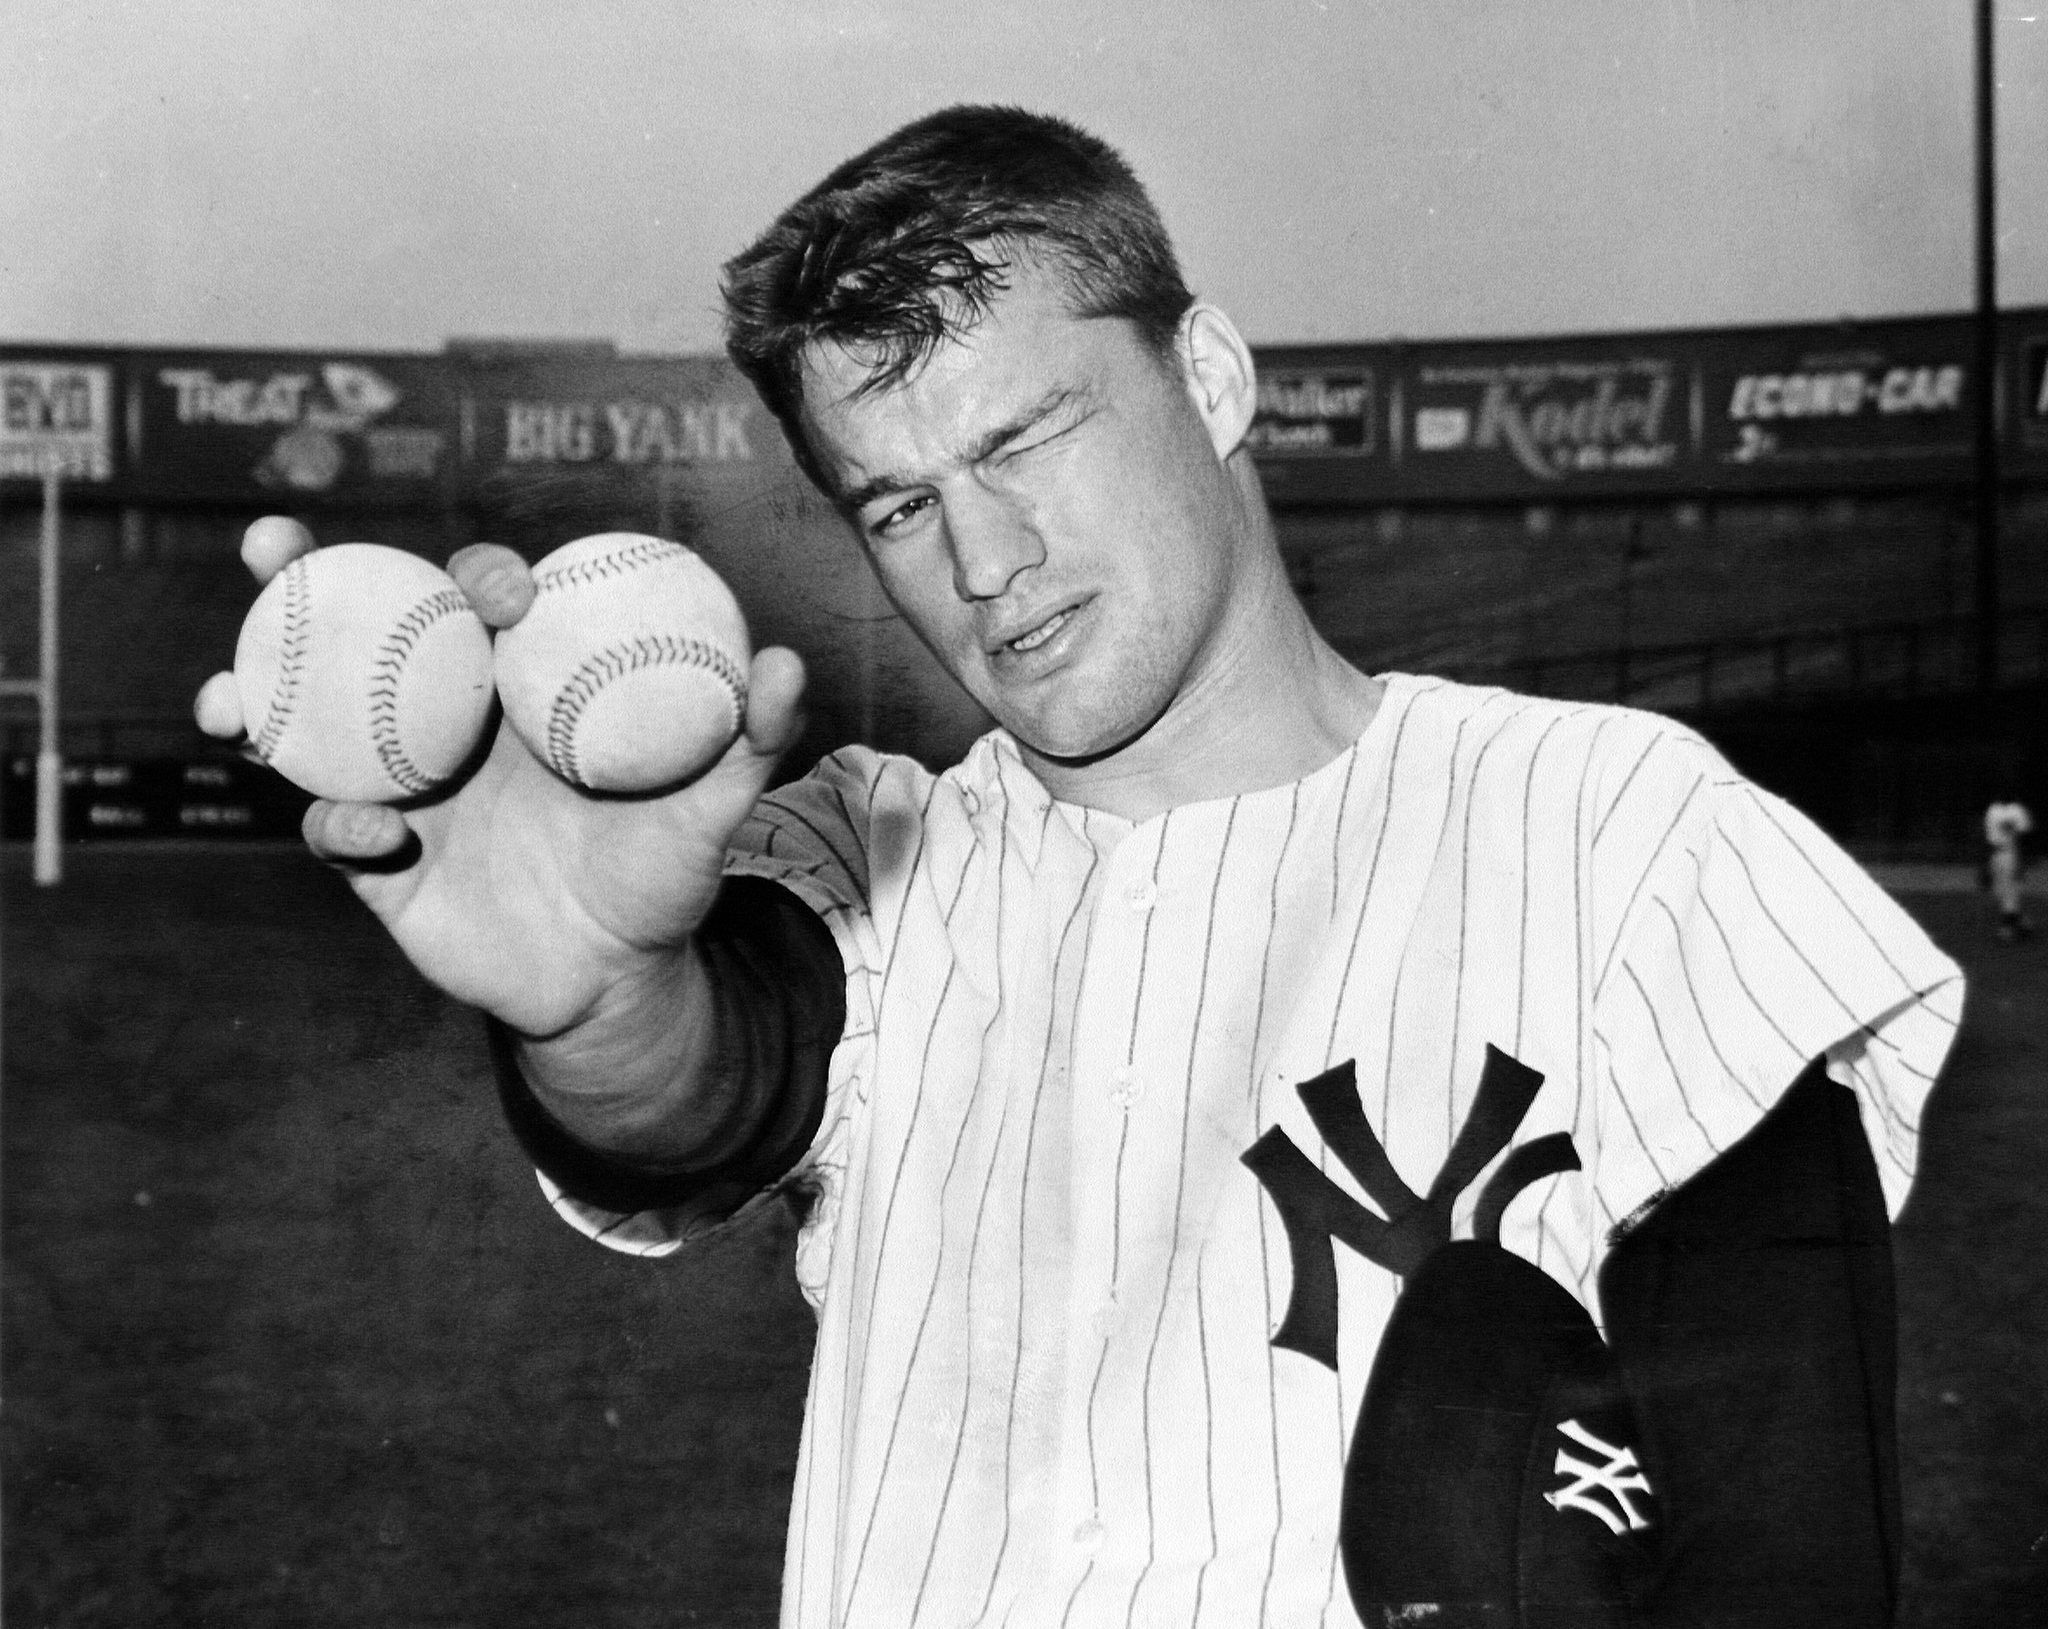 Ex-MLB pitcher Jim Bouton, who wrote controversial bestseller